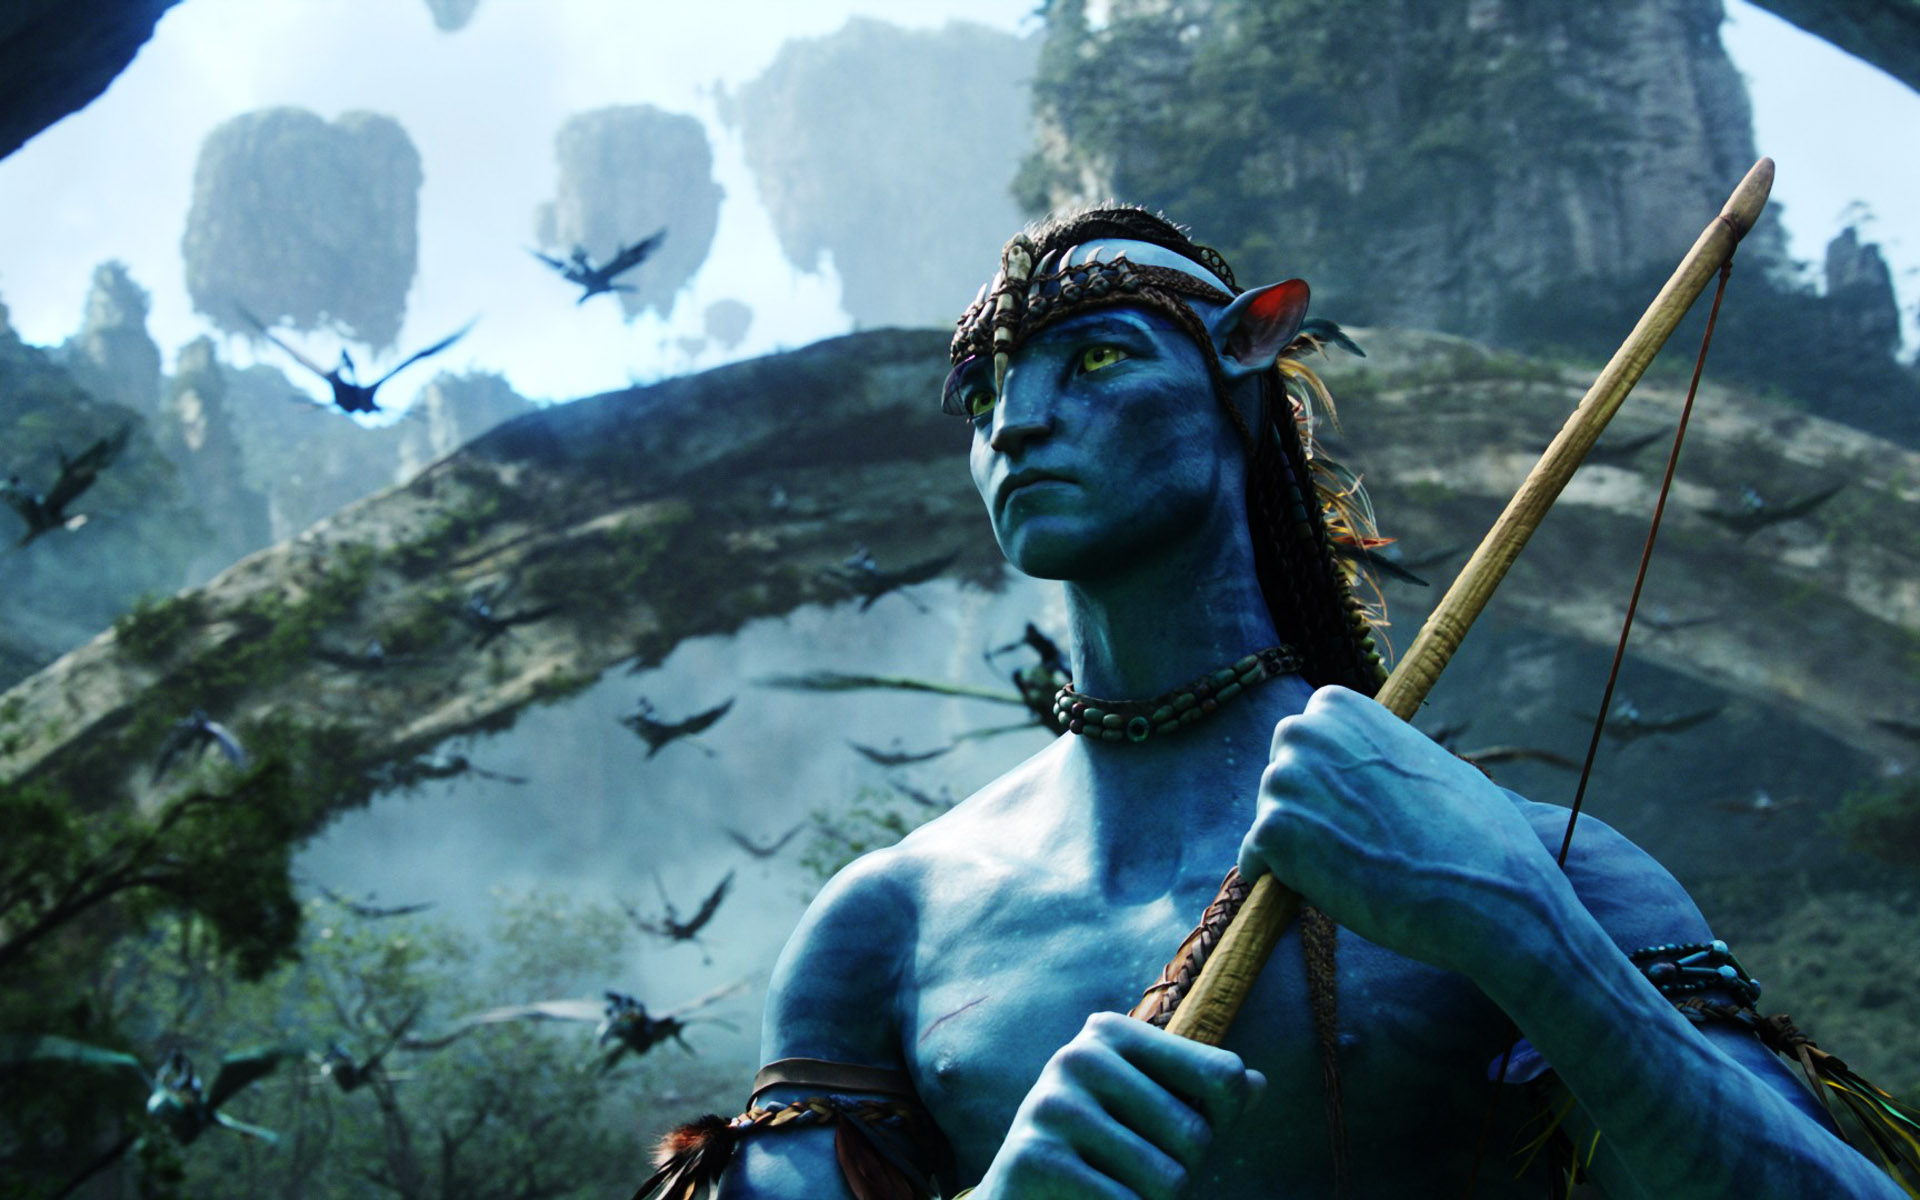 Avatar 2 The Way of Water Wallpapers  Top 35 Best Avatar 2 Backgrounds  Download